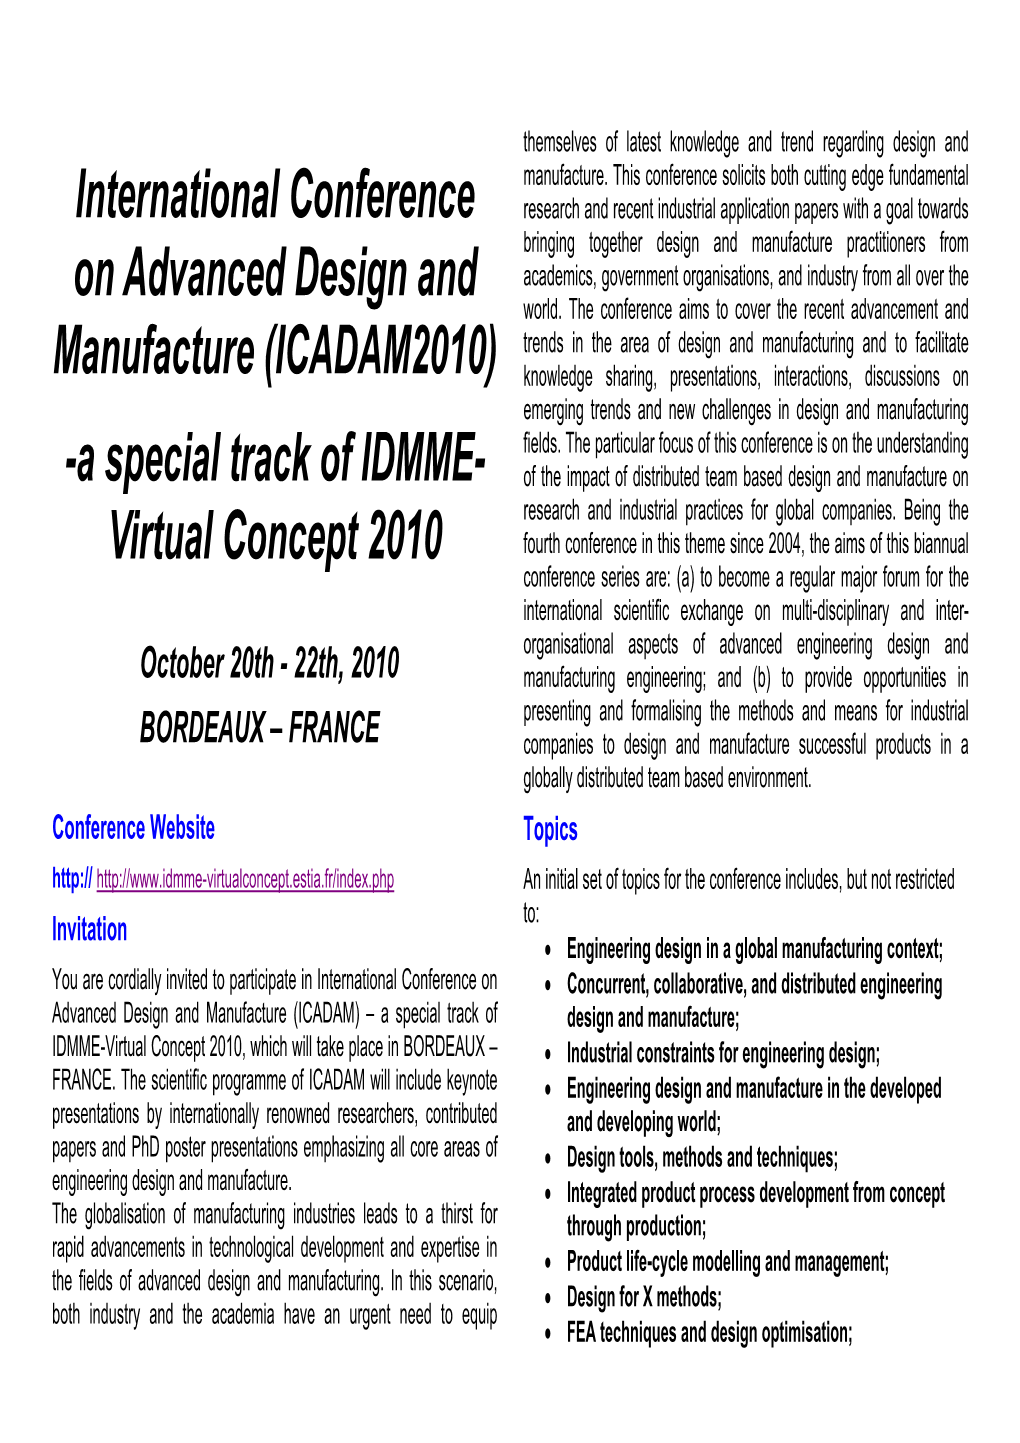 A Special Track of IDMME- Virtual Concept 2010